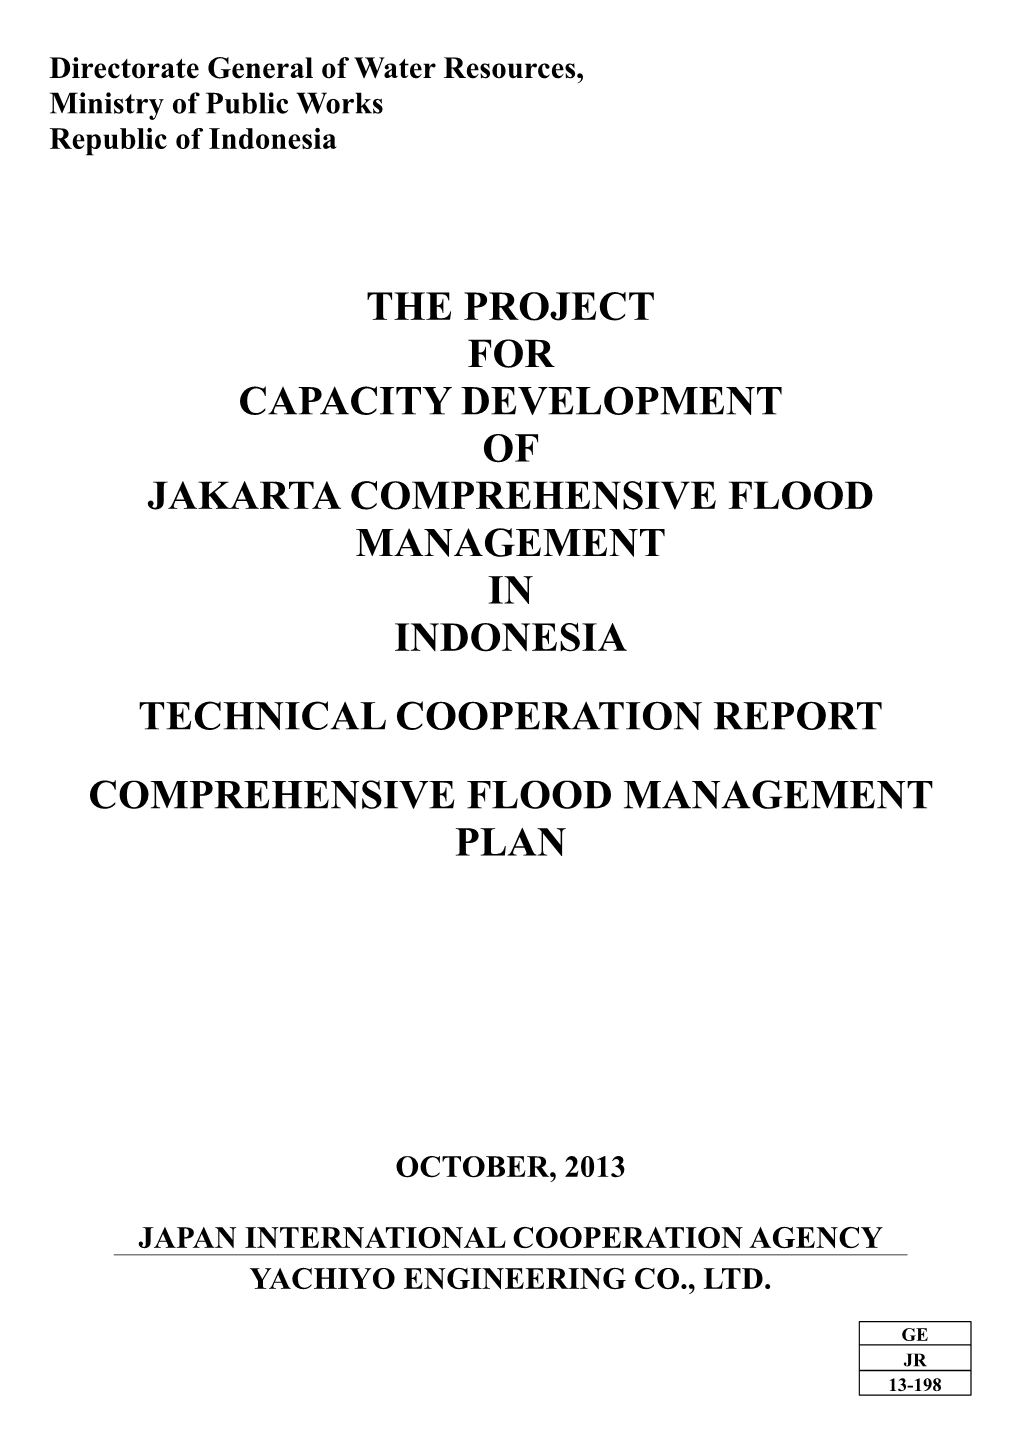 The Project for Capacity Development of Jakarta Comprehensive Flood Management in Indonesia